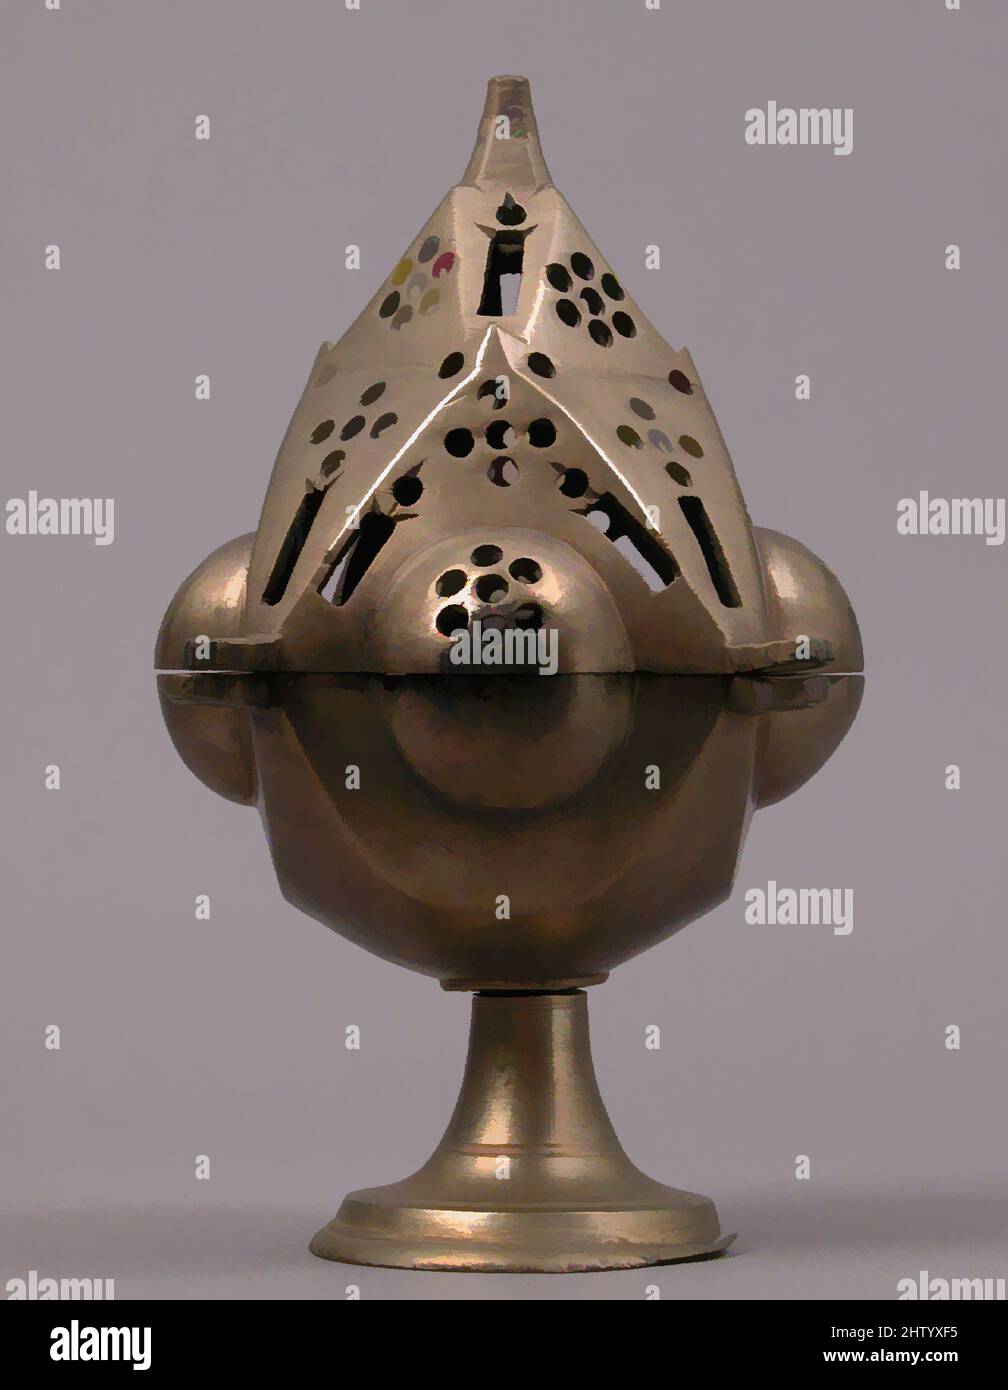 Art inspired by Censer, 16th century (?), South Netherlandish (?), Copper alloy, Overall: 7 15/16 x 5 9/16 in. (20.2 x 14.1 cm), Metalwork-Brass, Classic works modernized by Artotop with a splash of modernity. Shapes, color and value, eye-catching visual impact on art. Emotions through freedom of artworks in a contemporary way. A timeless message pursuing a wildly creative new direction. Artists turning to the digital medium and creating the Artotop NFT Stock Photo